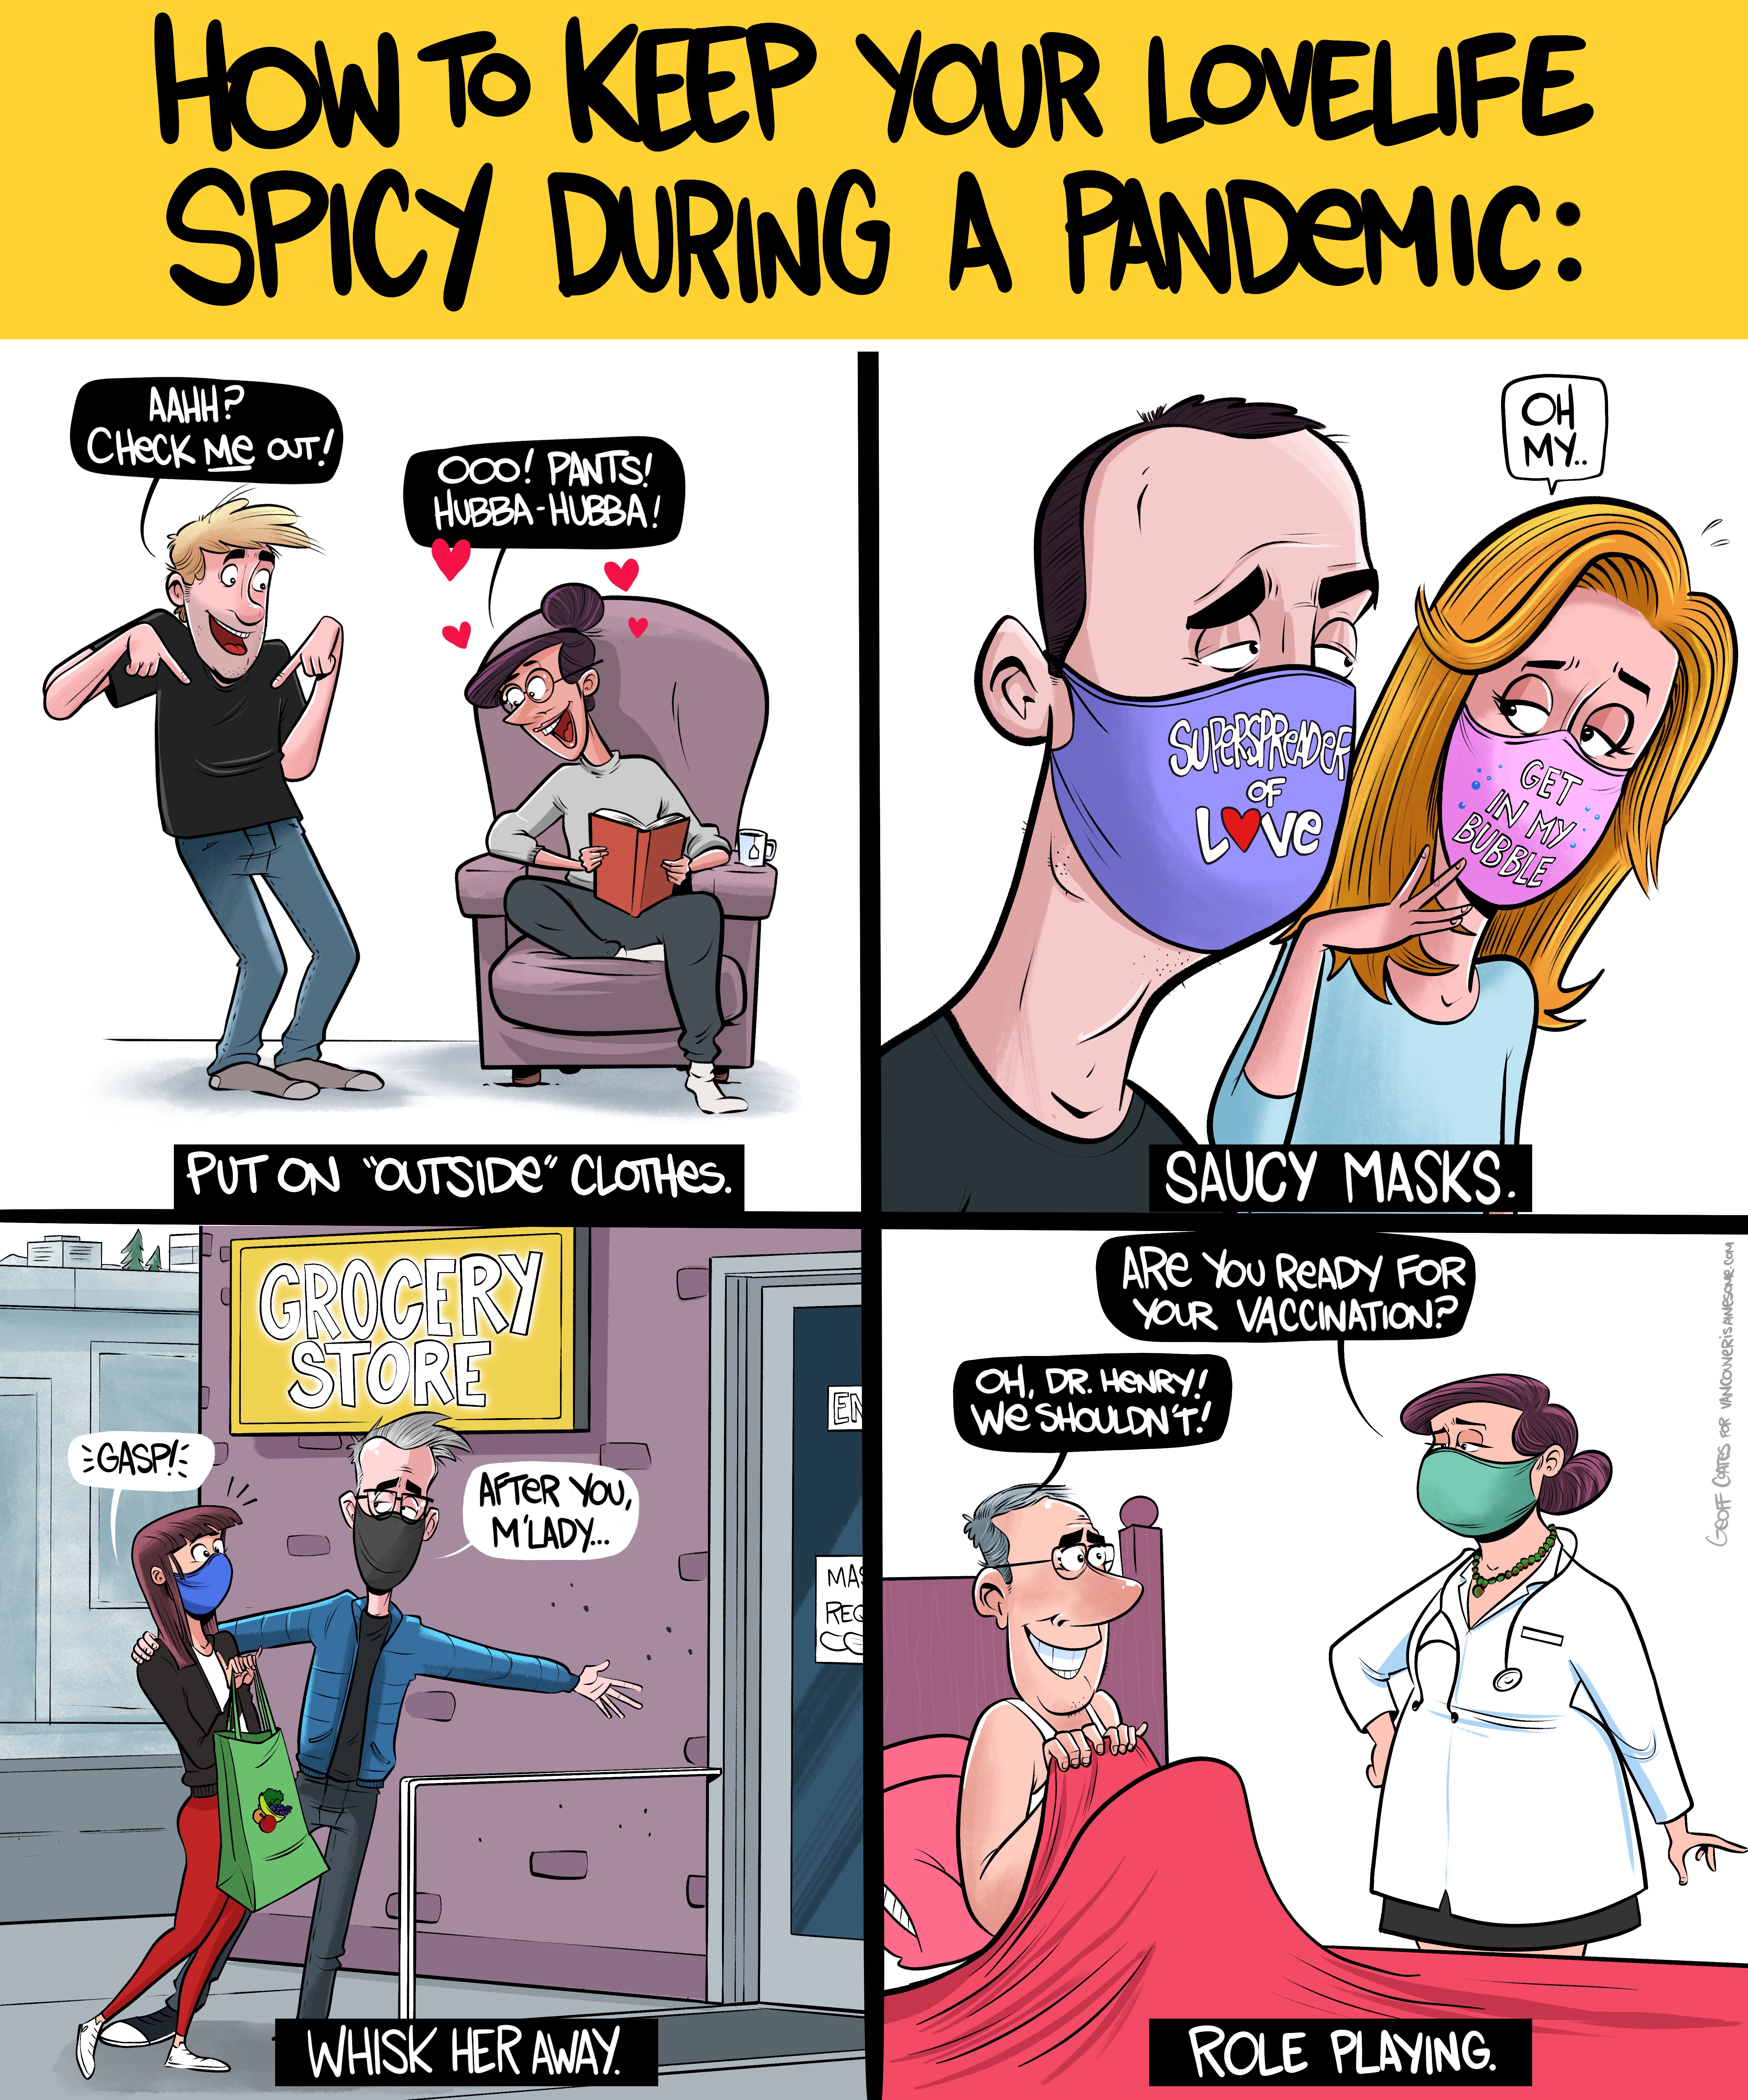 Comic shows funny tips for a healthy love life during the pandemic -  Vancouver Is Awesome